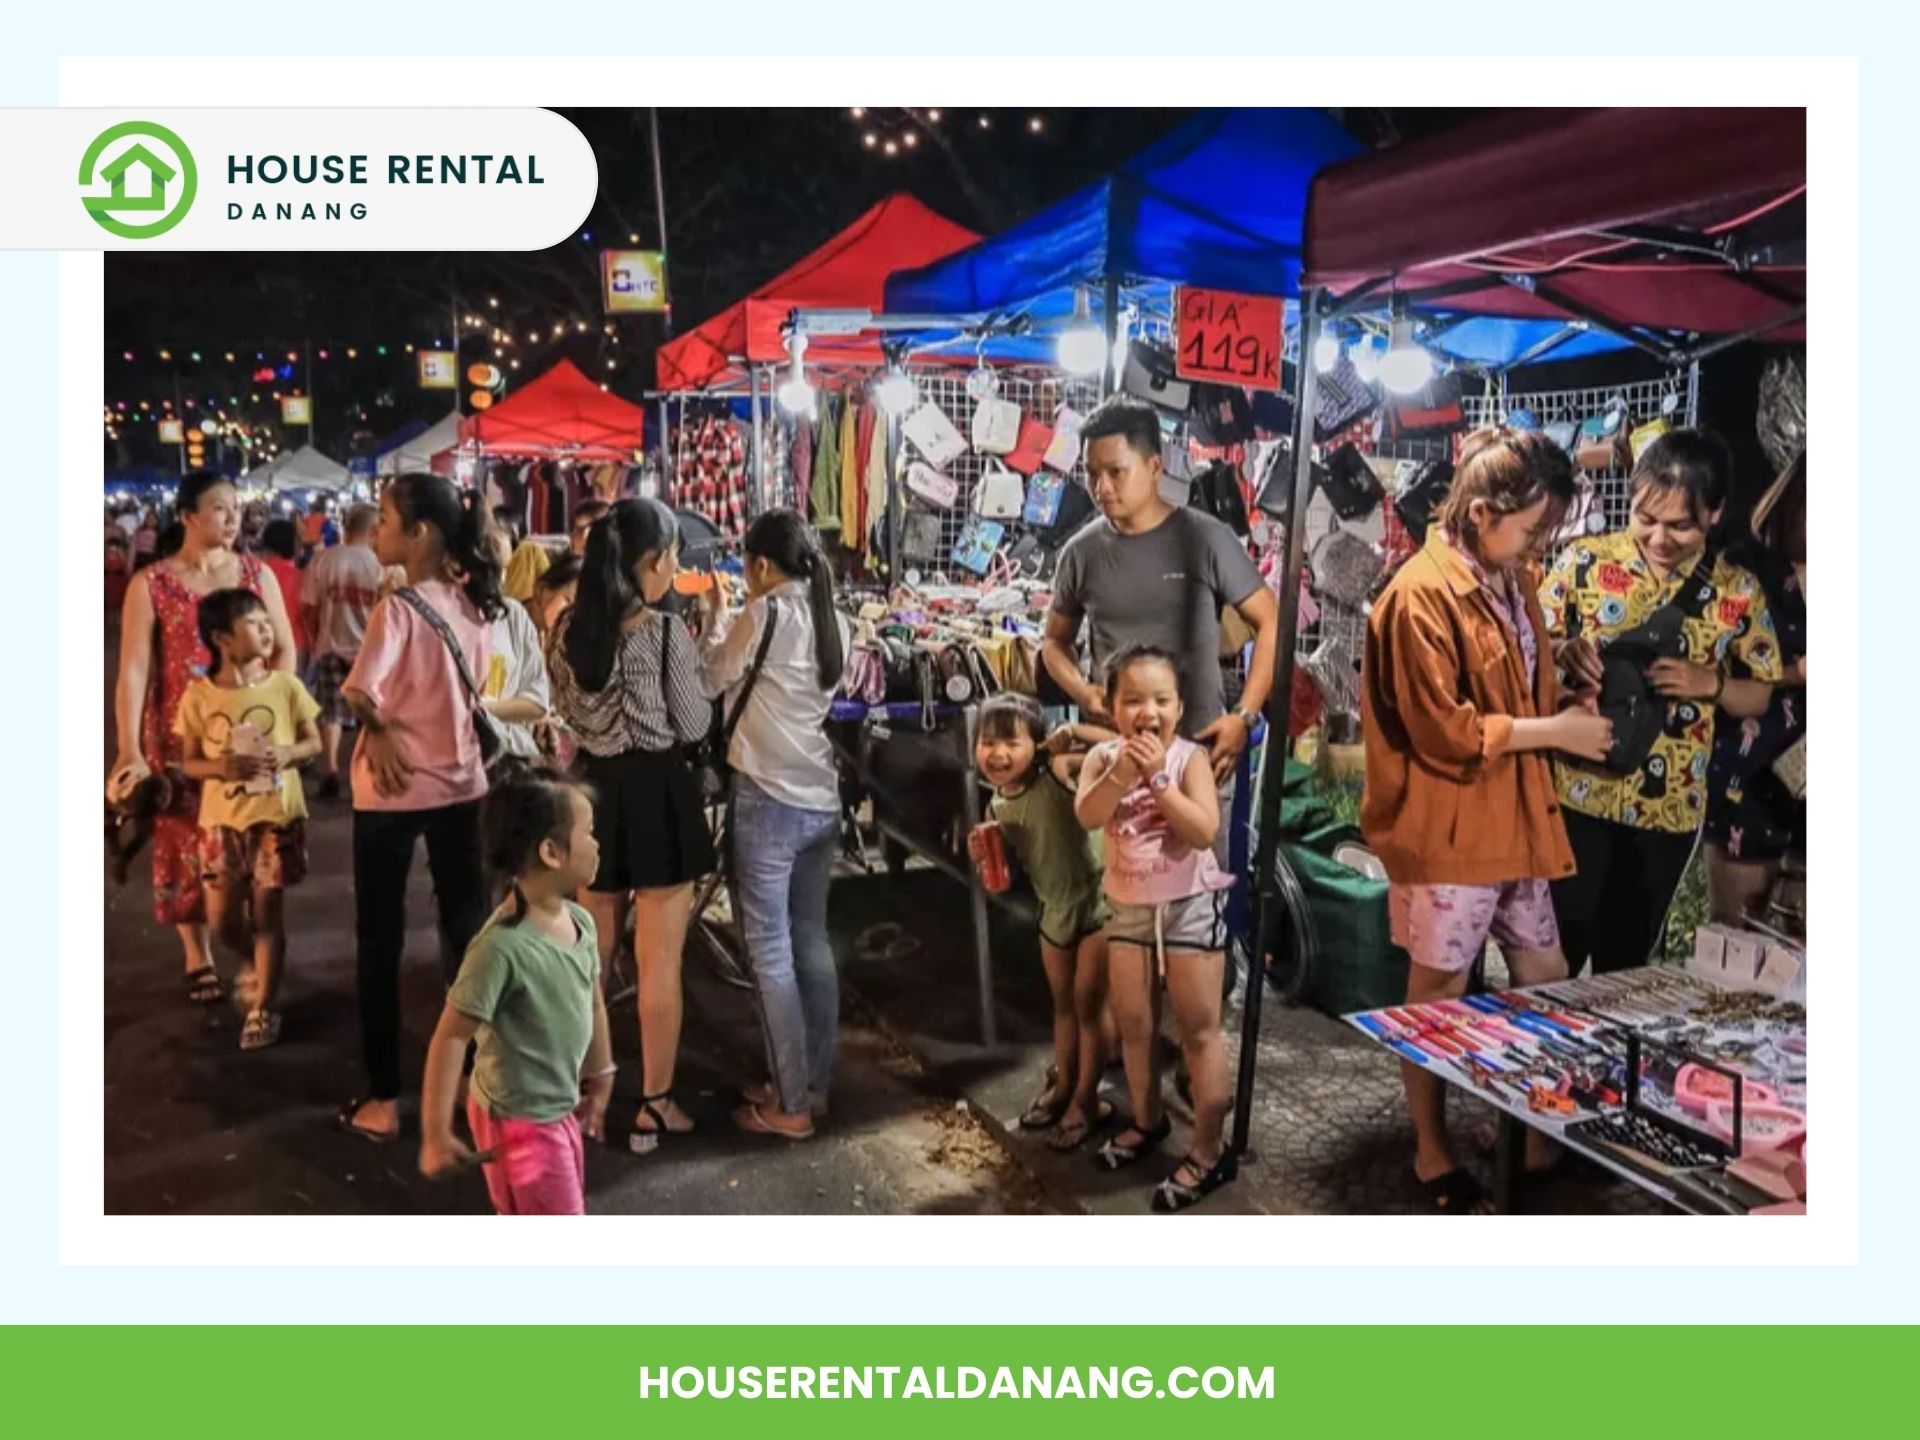 A bustling night market in Danang features people shopping at various brightly lit stalls. A family with three children is seen in the foreground, enjoying the vibrant scene. Colorful canopies and merchandise are displayed, adding to the lively atmosphere of these Night Markets in Danang.